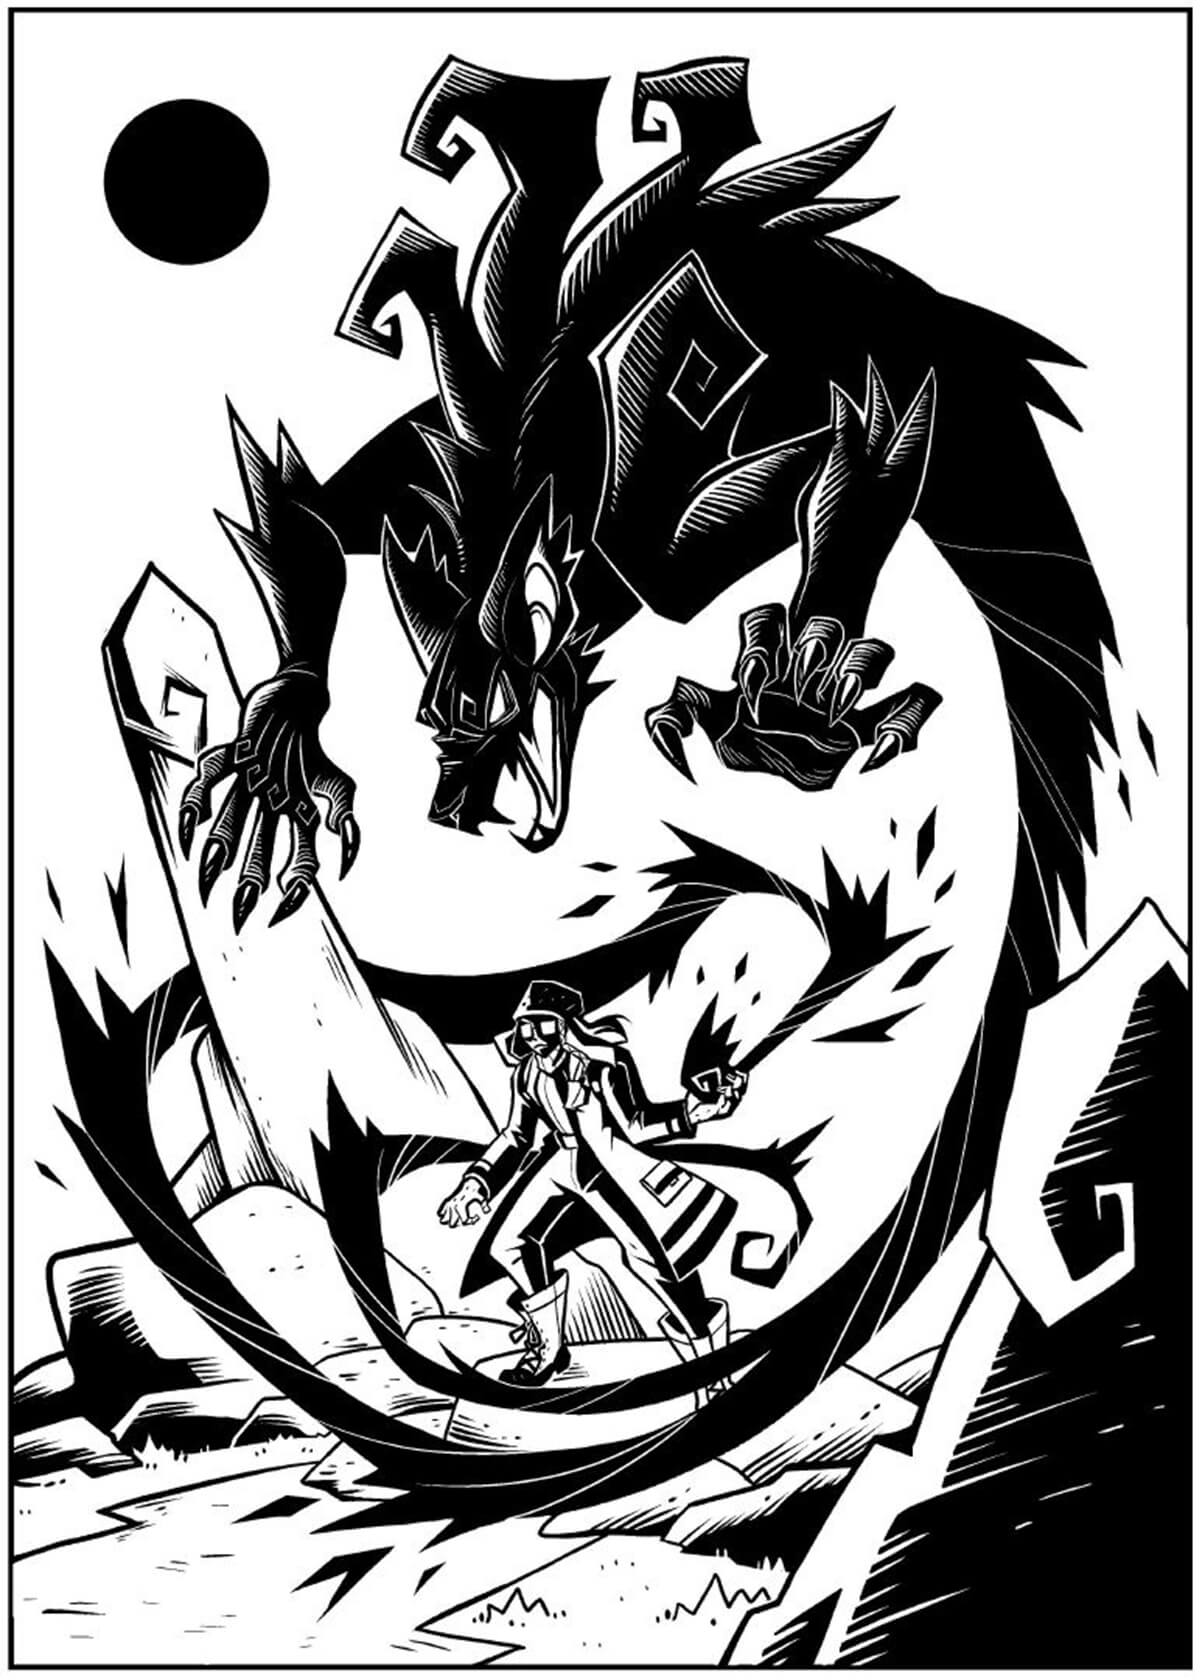 A panel from GRL PWR showing the character Cadence summoning a wolf beast.